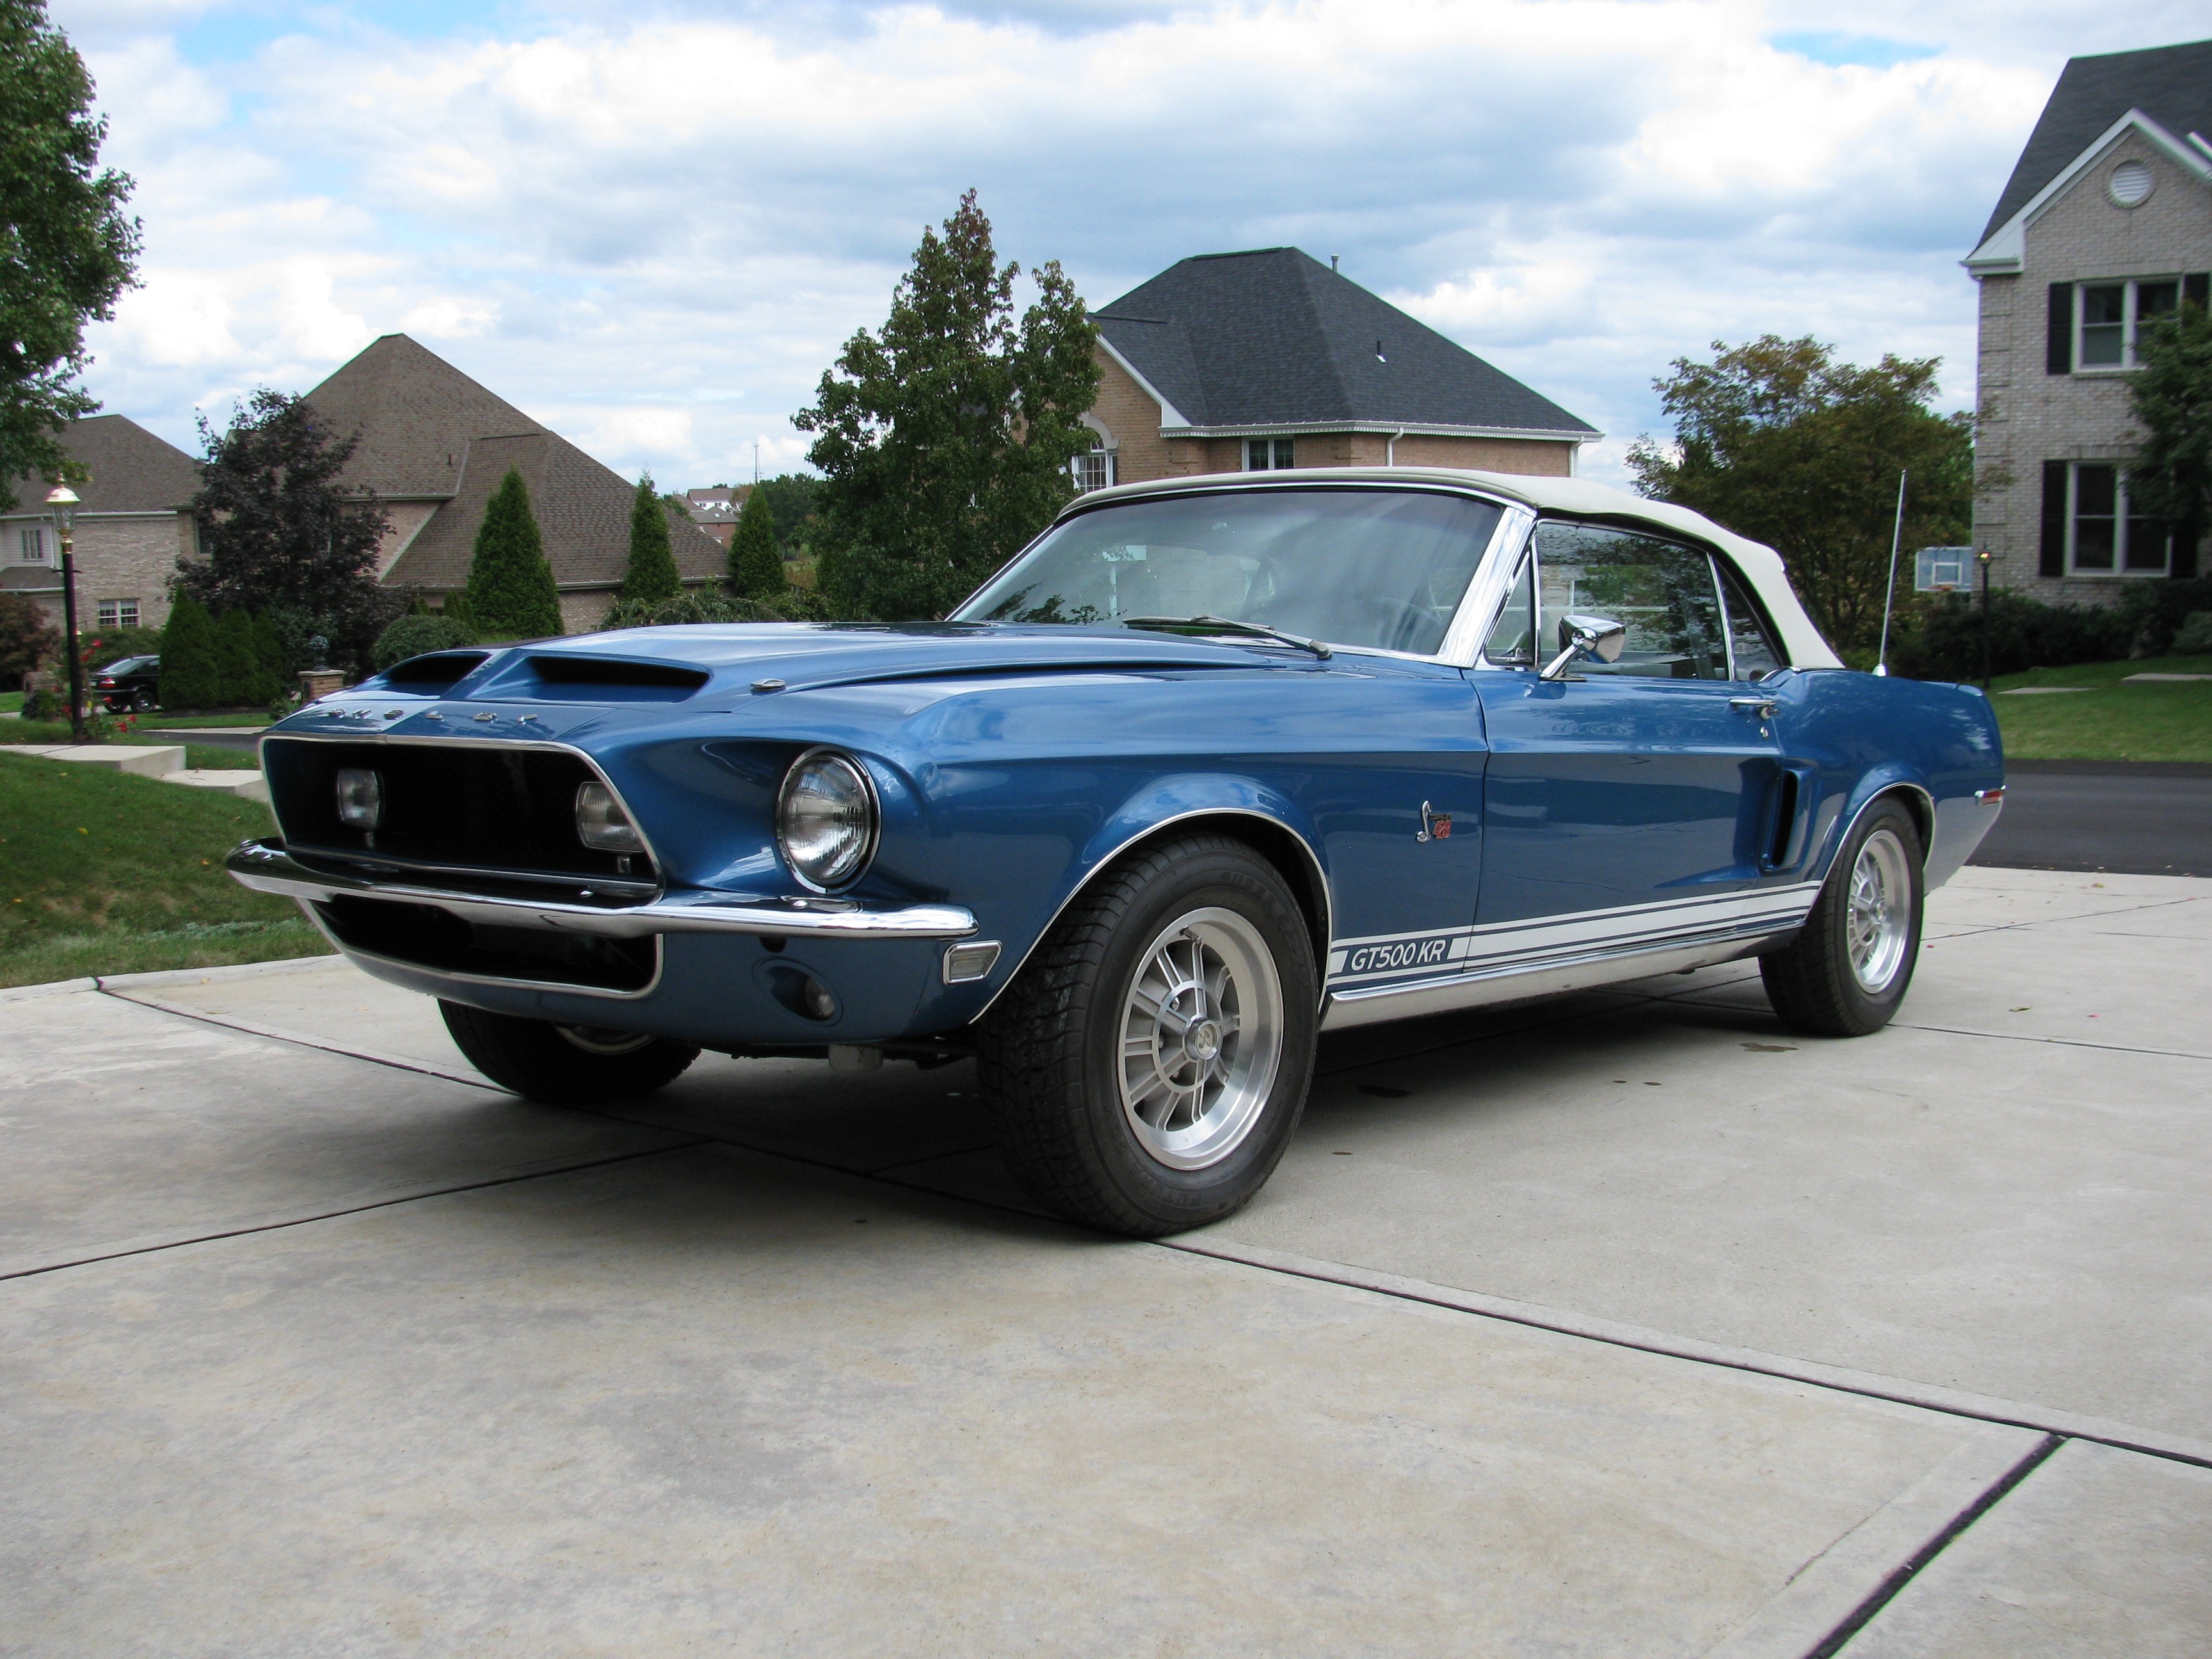 Blue Car Car Muscle Car Shelby Cobra Gt500 King Of The Road 3456x2592